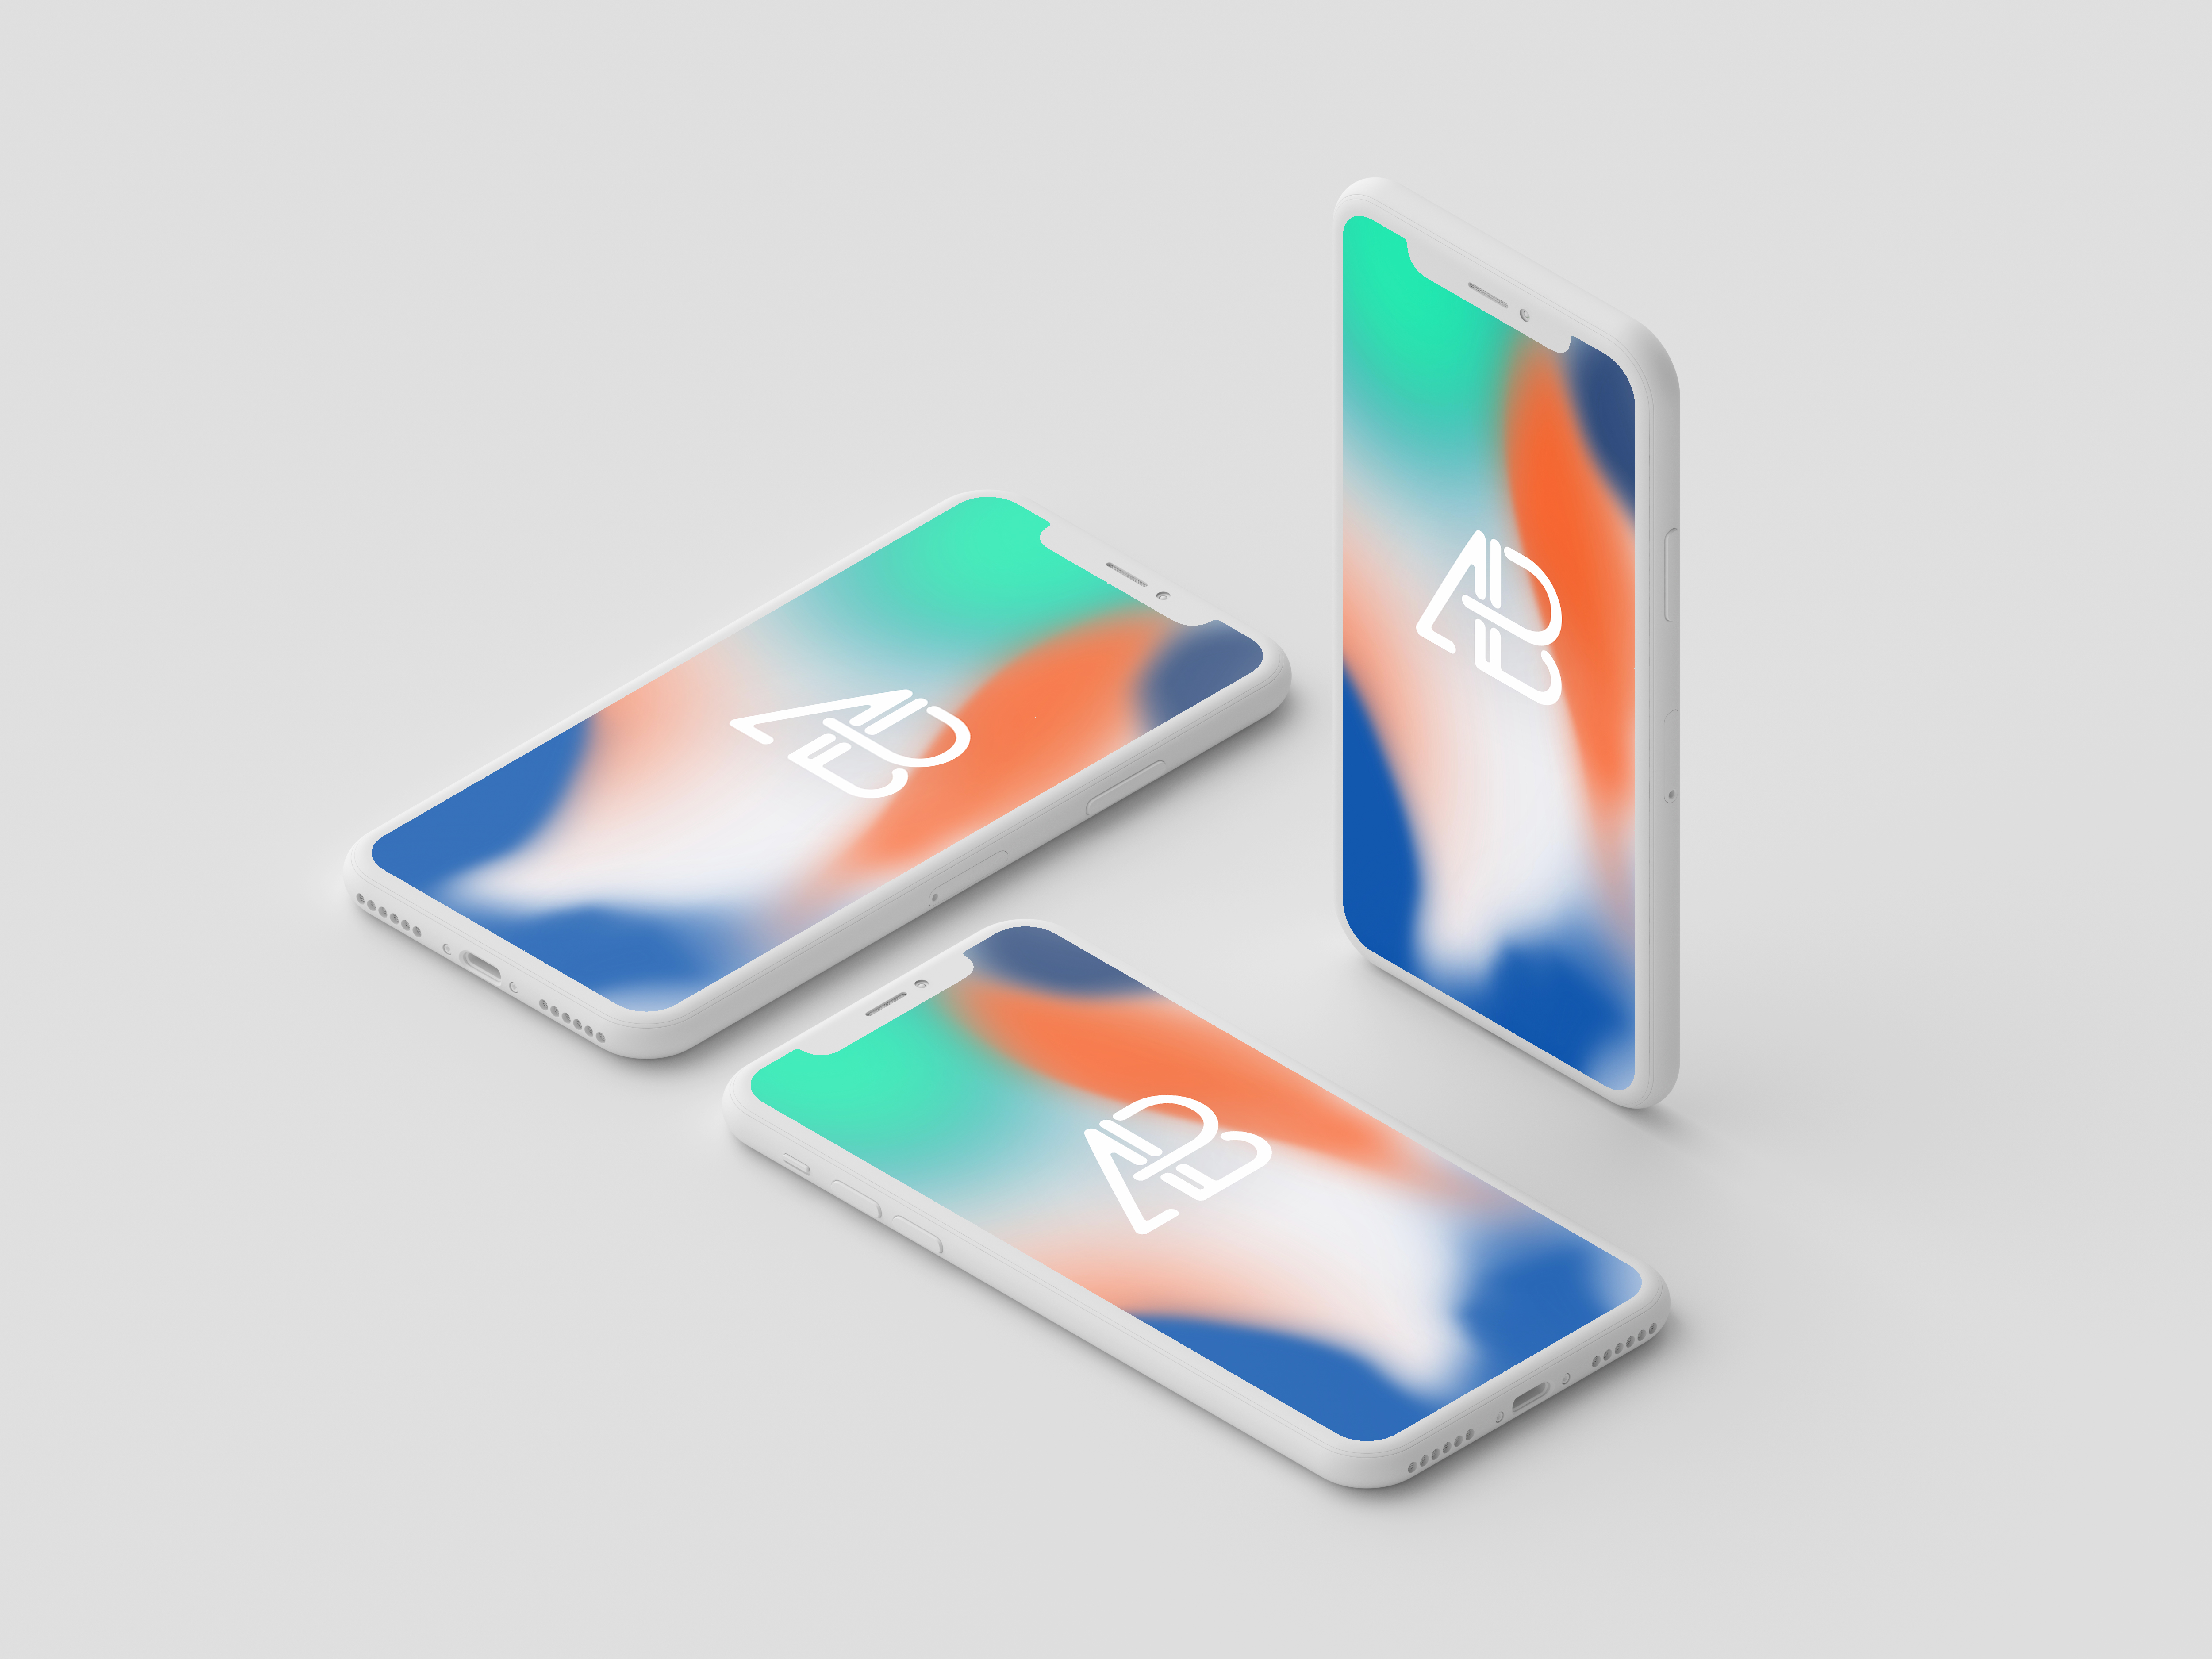 clay_iphone_x_mockup_vol.2_by_anthony_boyd_graphics__1_.jpg